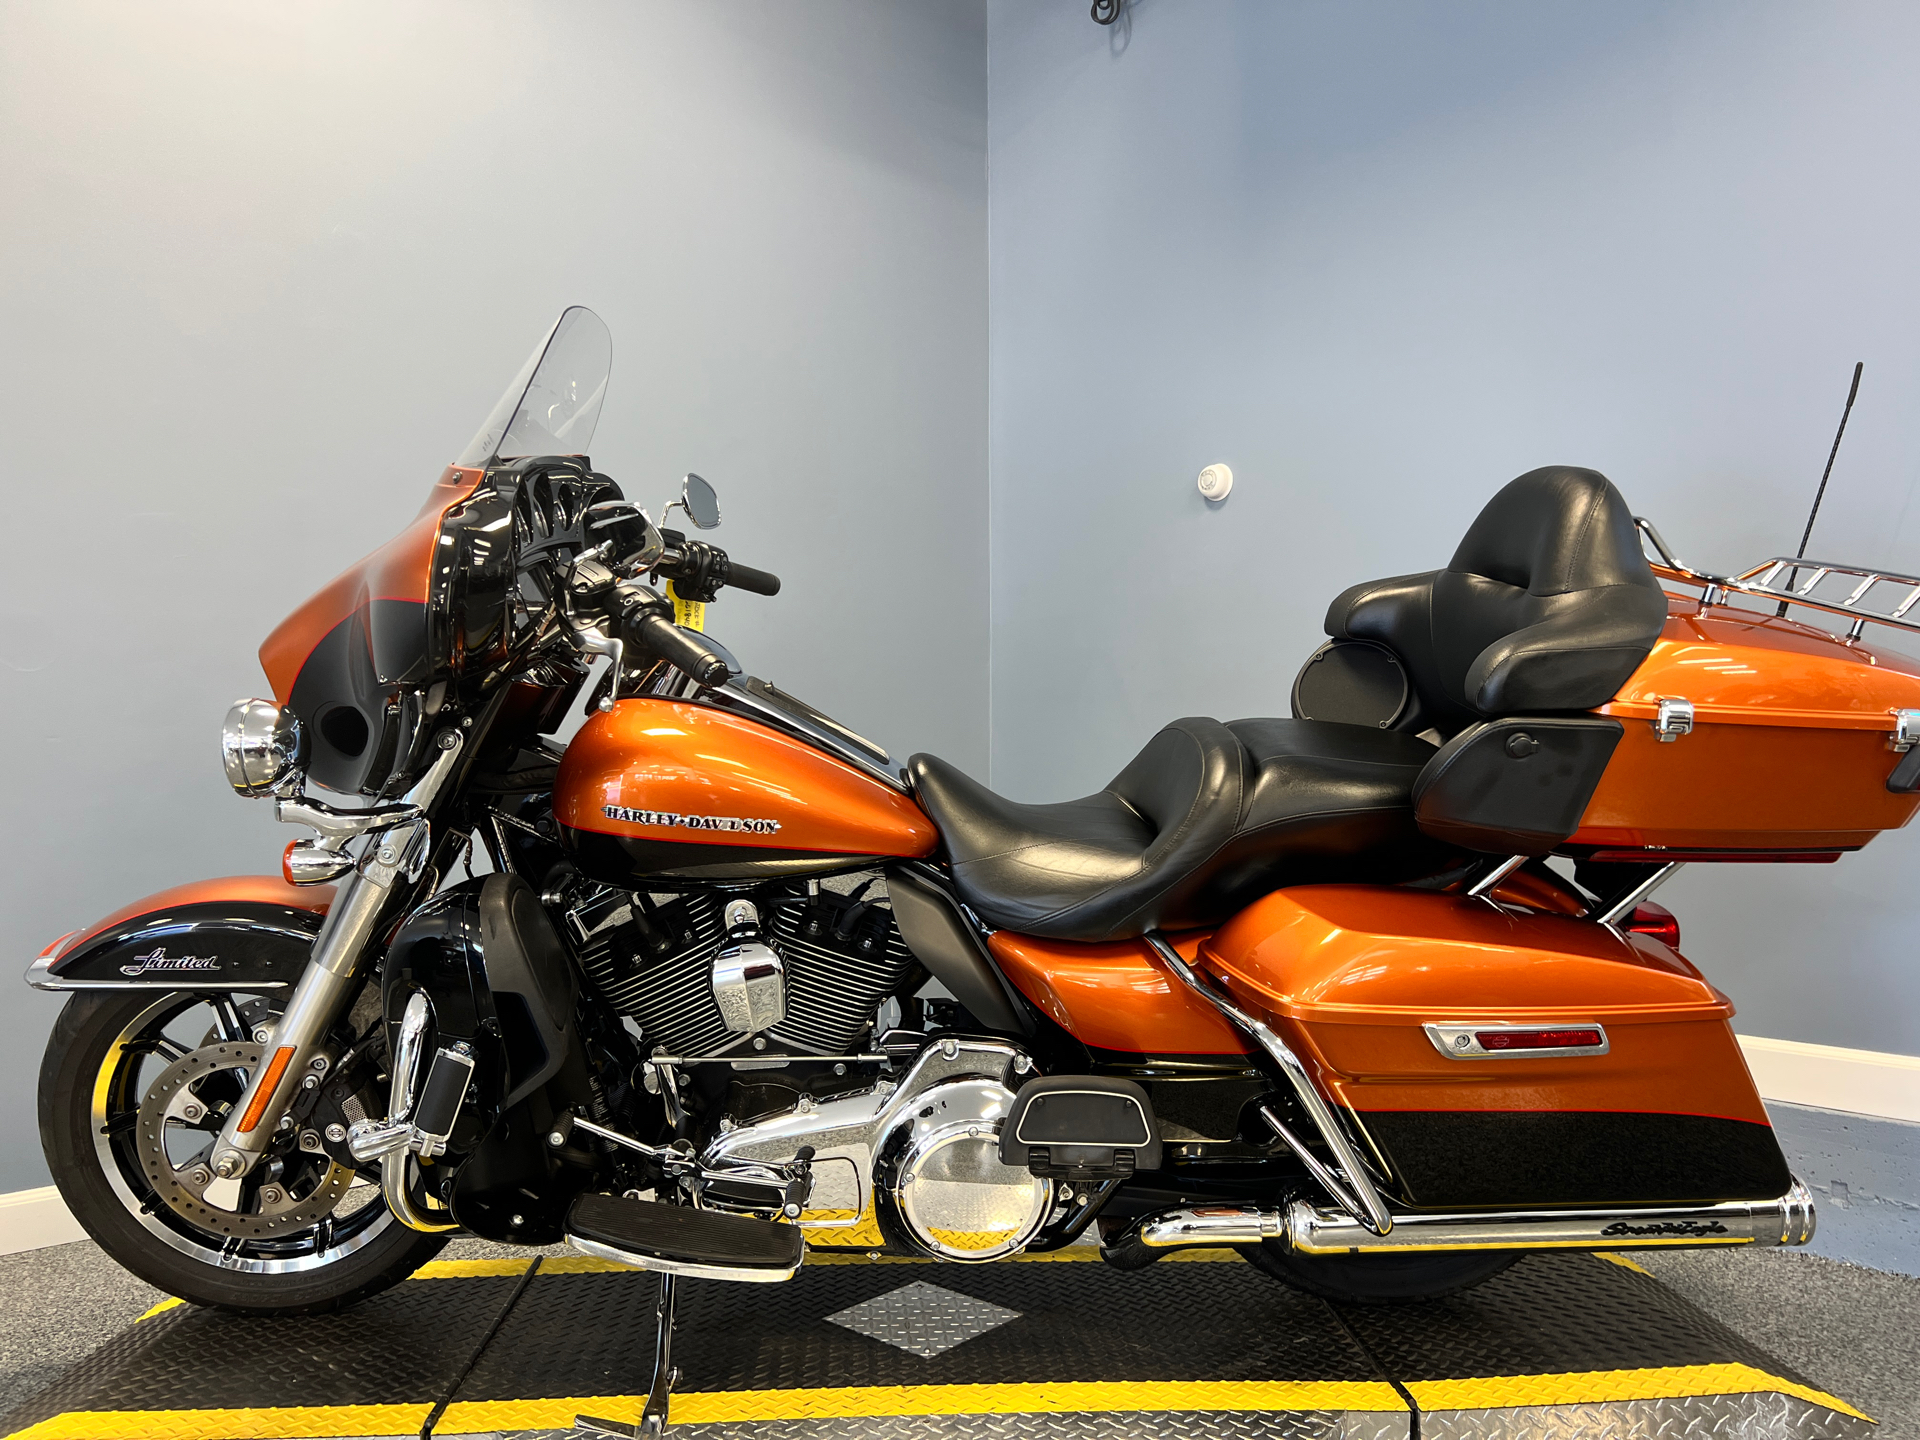 2016 Harley-Davidson Ultra Limited in Meredith, New Hampshire - Photo 7